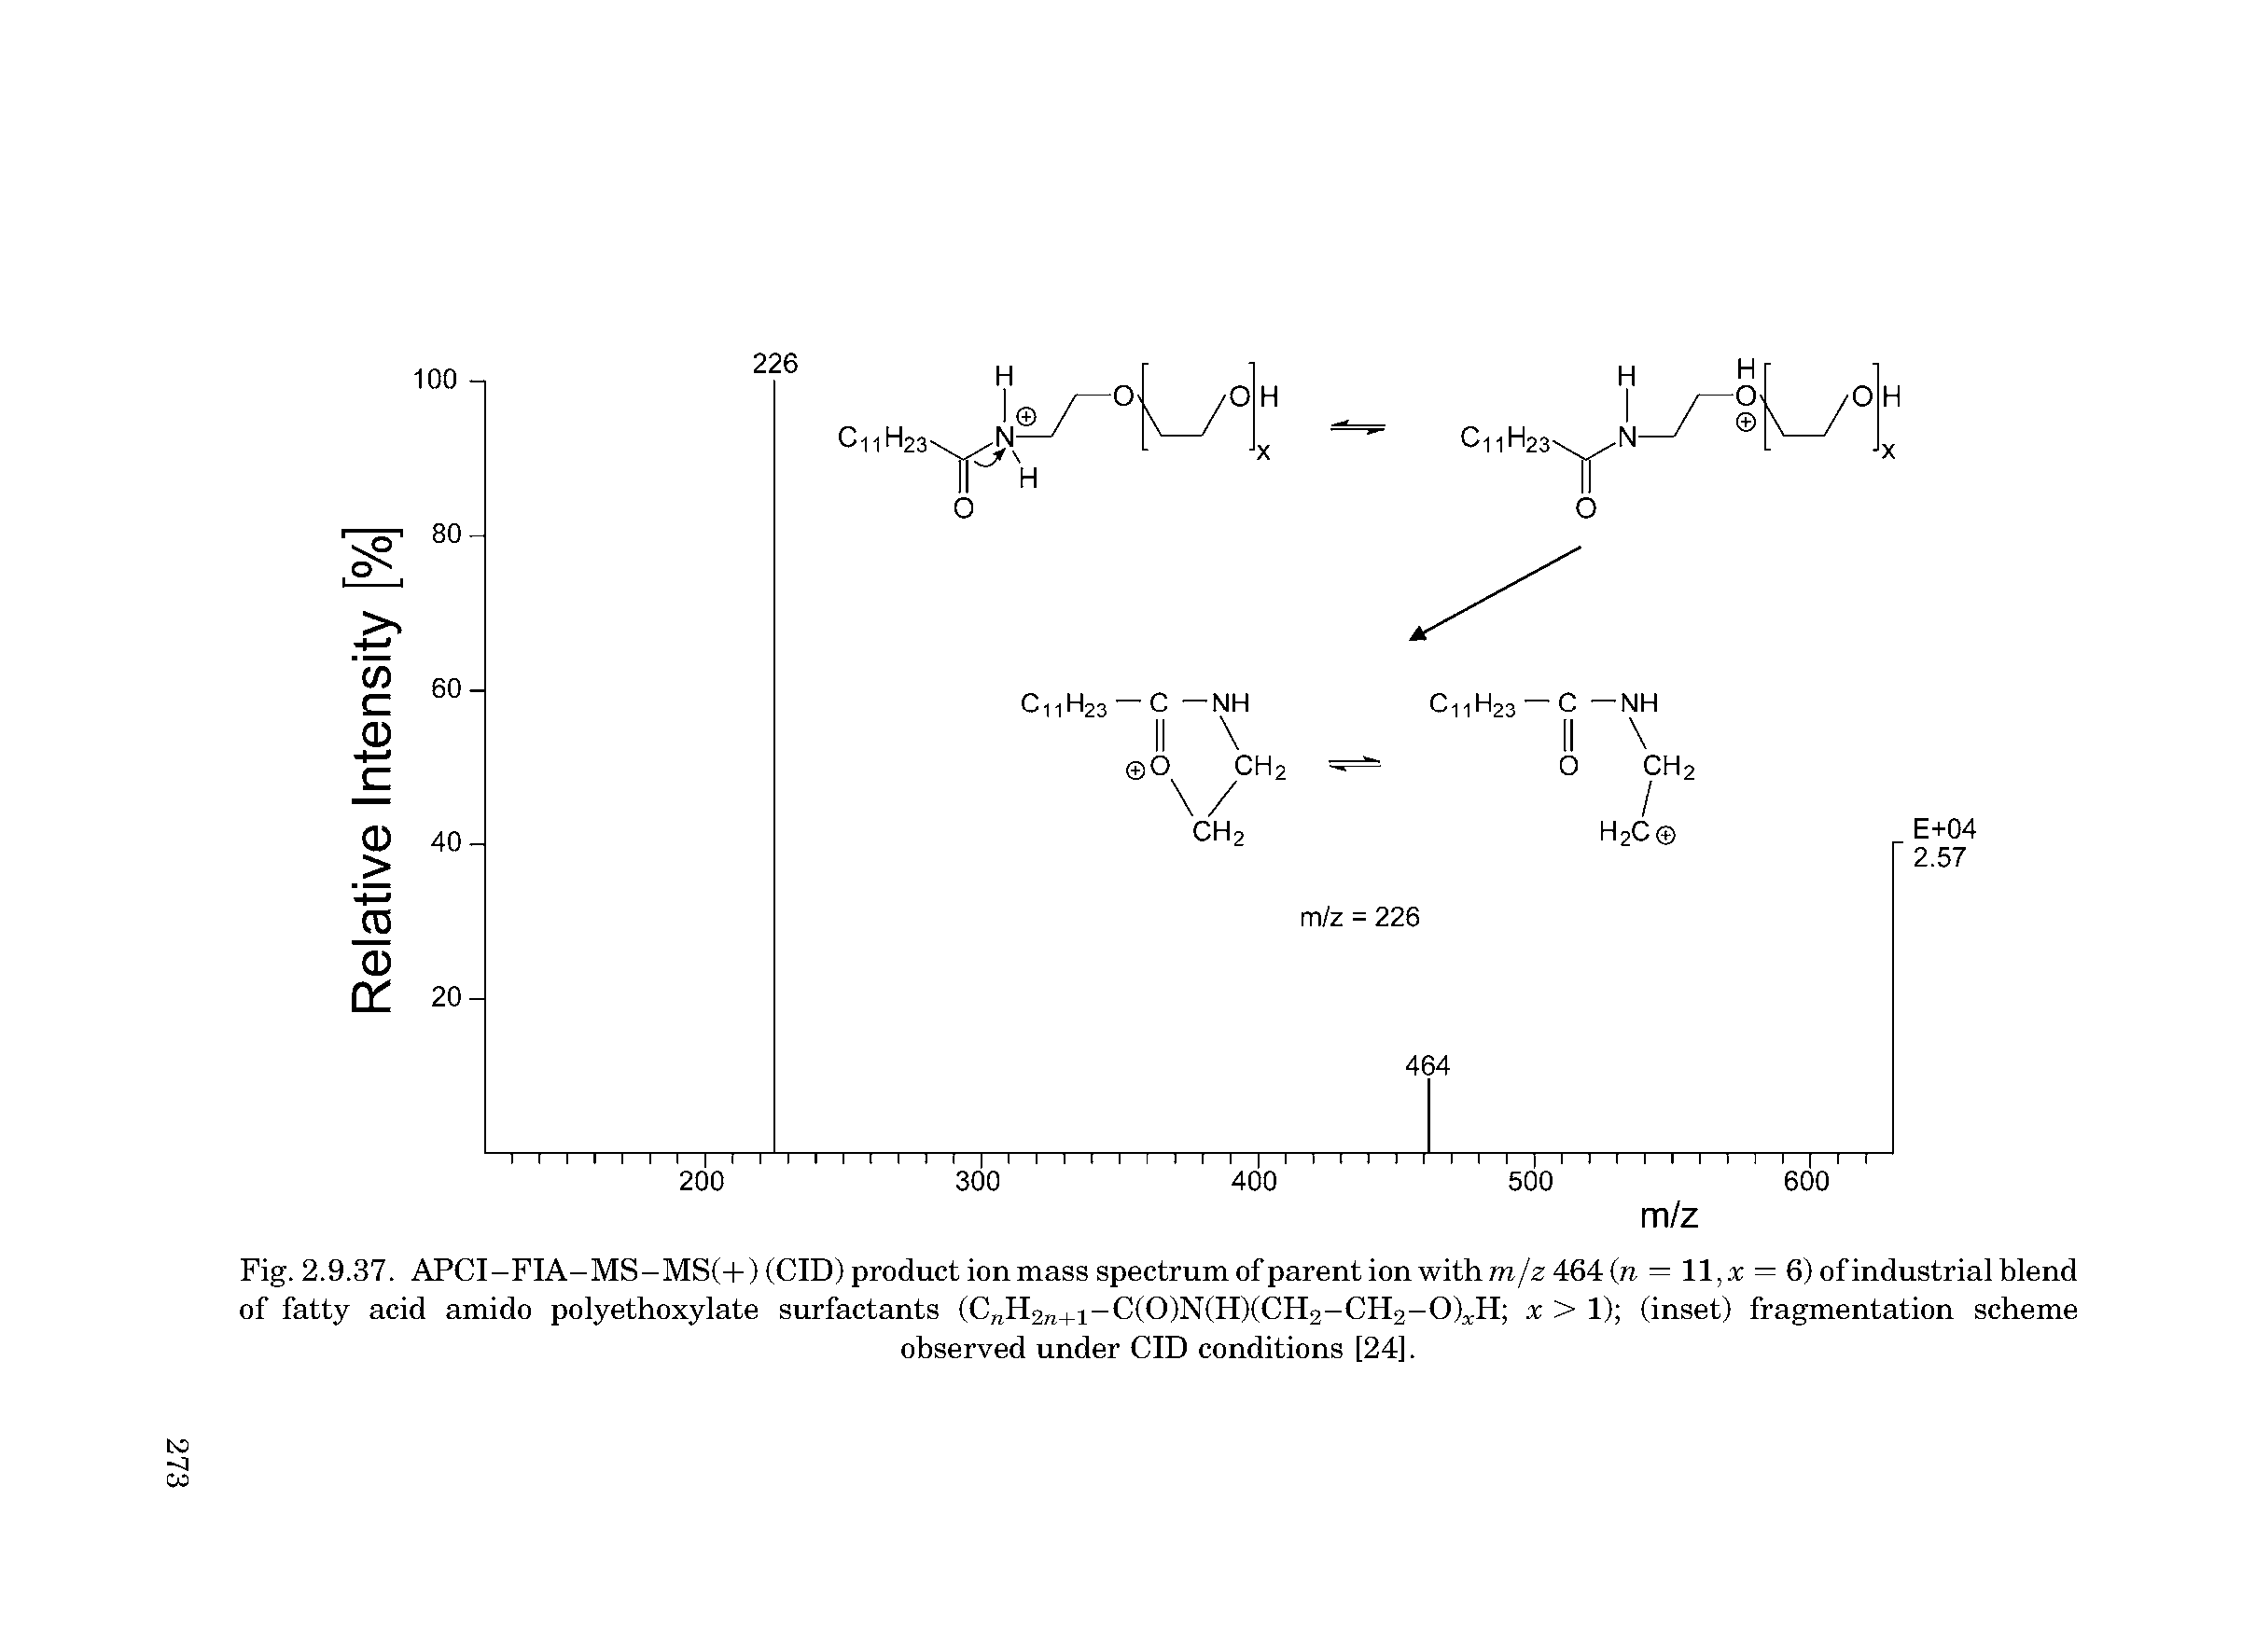 Fig. 2.9.37. APCI-FIA-MS-MS(+) (CID) product ionmass spectrum of parent ion withm/z 464 (n = 11,x — 6) of industrial blend of fatty acid amido polyethoxylate surfactants (CnH2n+i-C(0)N(H)(CH2-CH2-0)xH x > 1) (inset) fragmentation scheme...